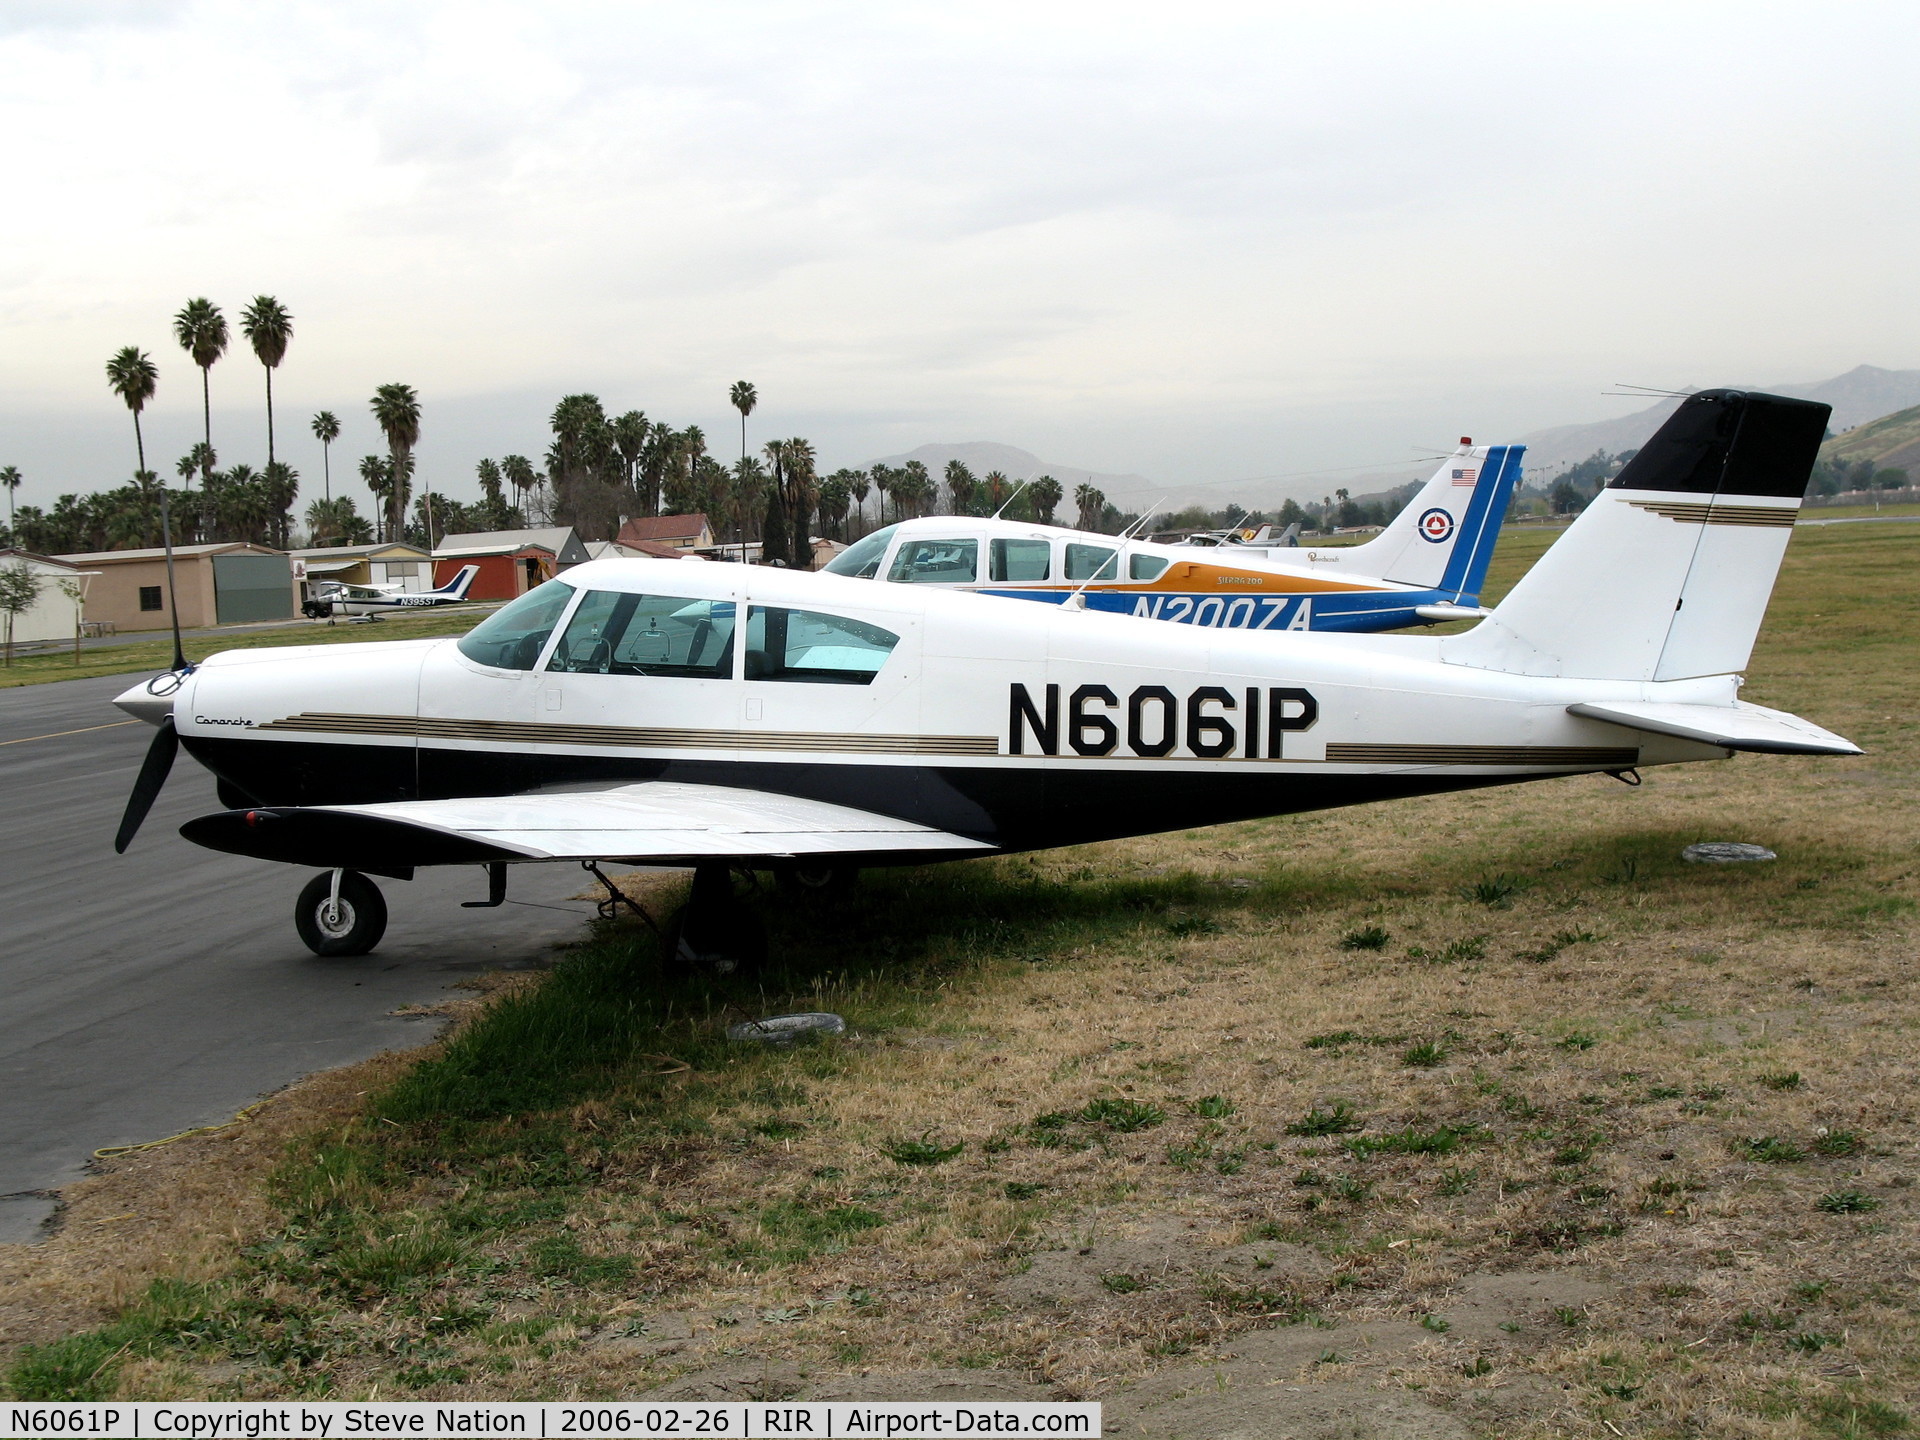 N6061P, 1959 Piper PA-24-250 Comanche C/N 24-1157, 1959 Piper PA-24-250 at Flabob Airport (Riverside, CA) just before the storm!